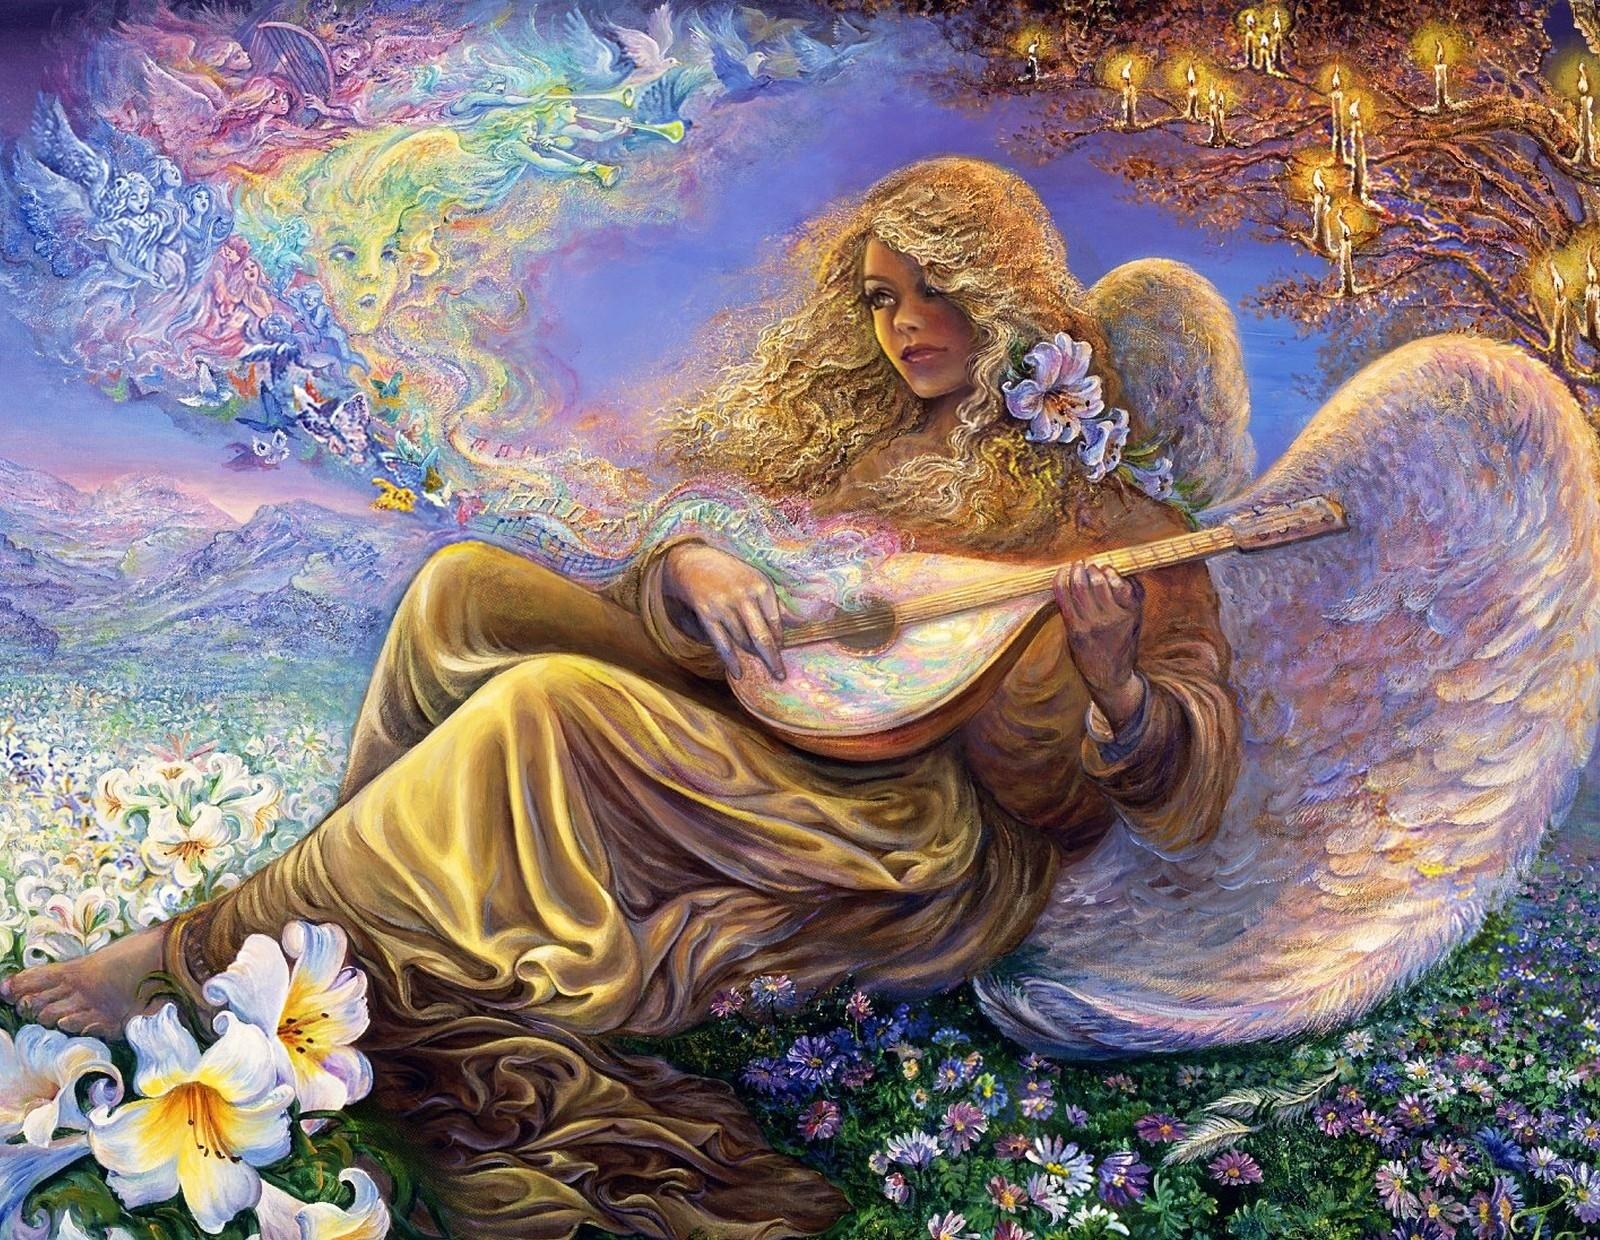 Wallpaper Full HD fantasy, angel, music, flowers, candles, girl, melody